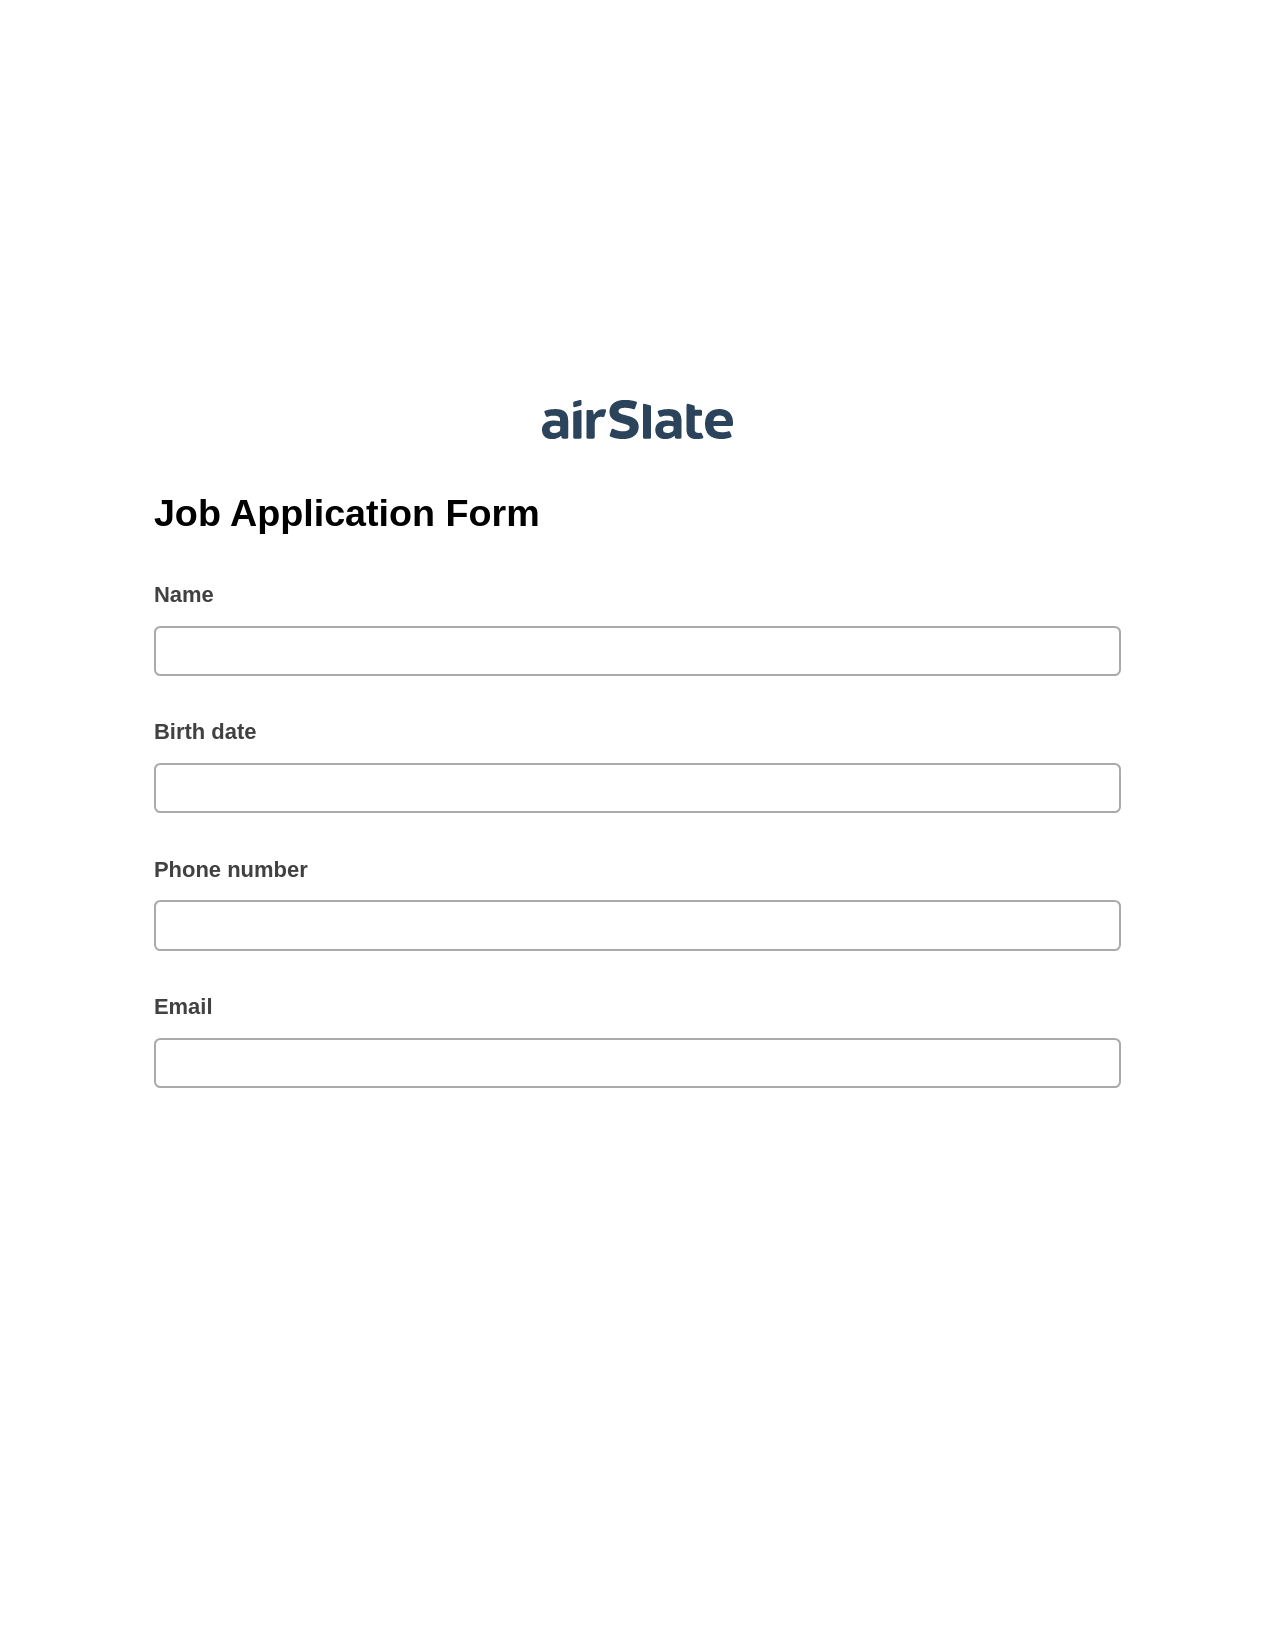 Multirole Job Application Form Pre-fill from another Slate Bot, Export to MS Dynamics 365 Bot, Export to NetSuite Record Bot